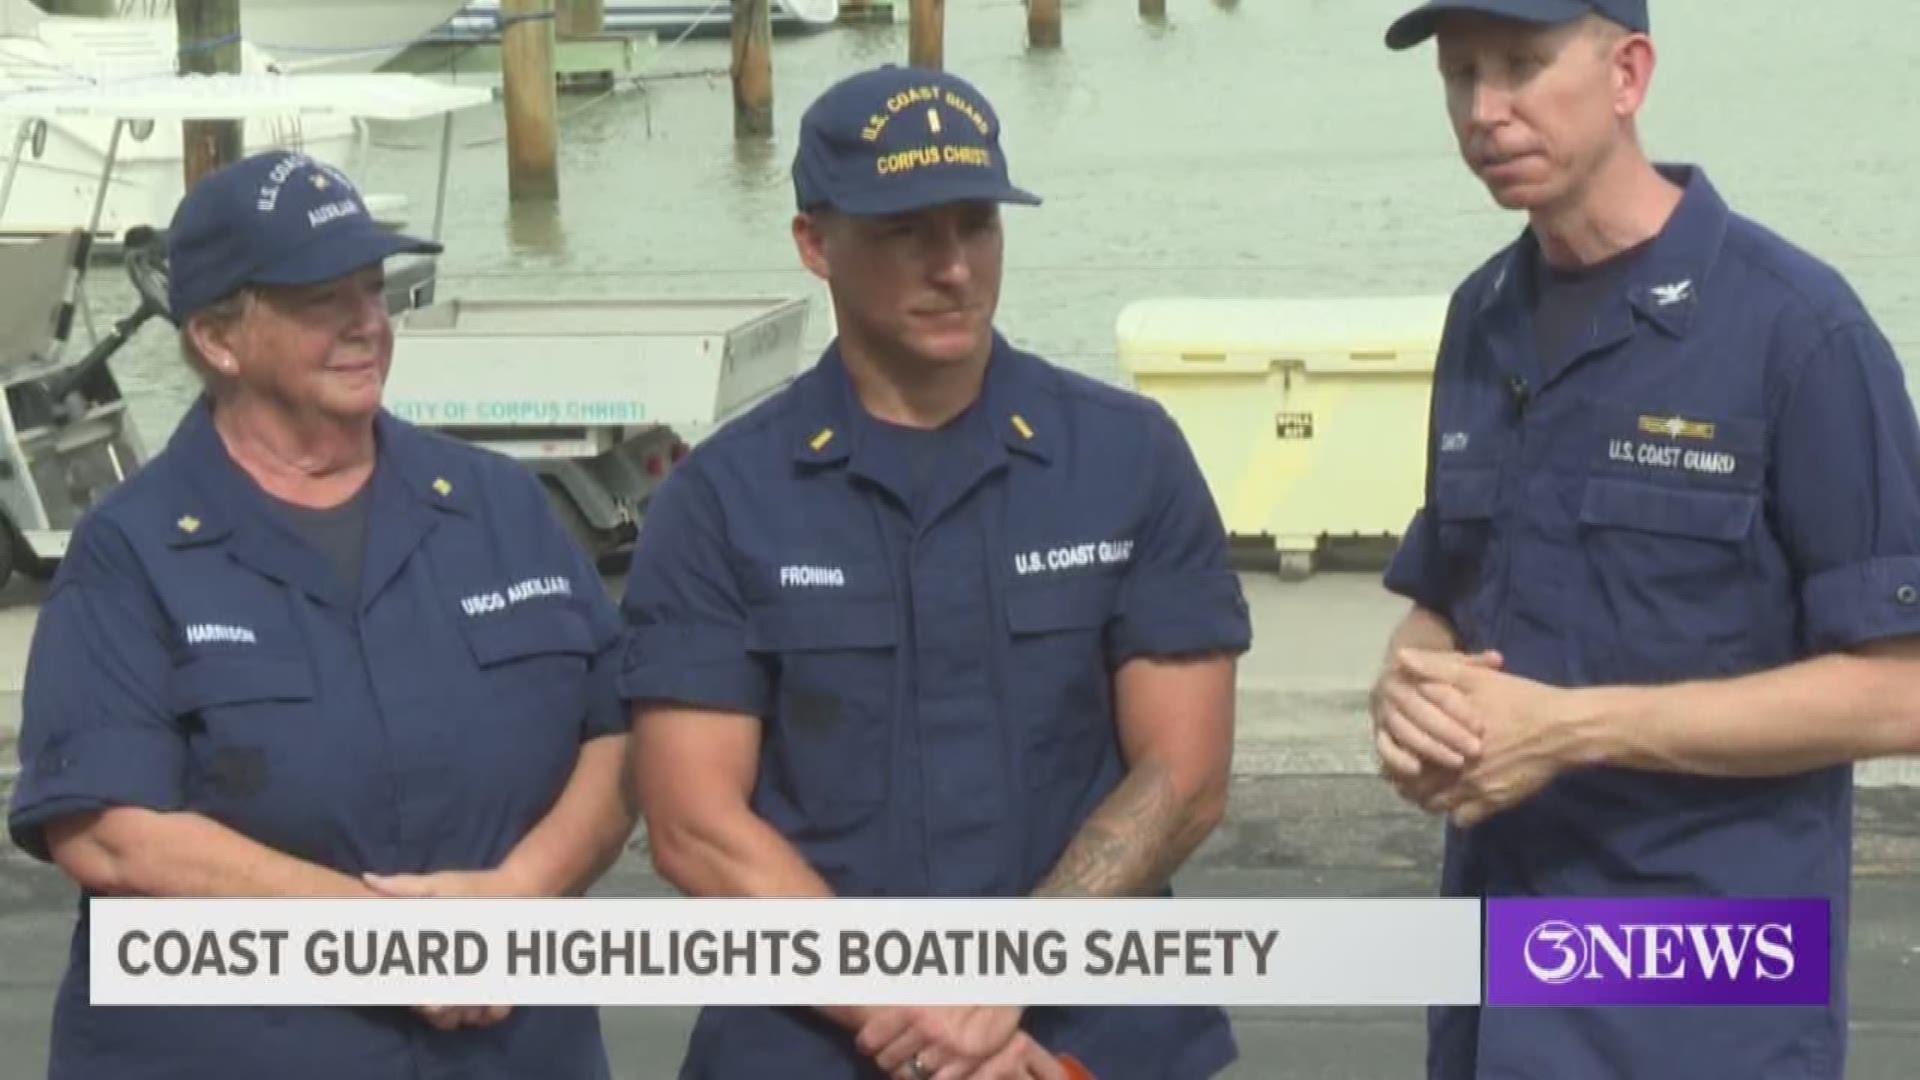 With summer almost upon us, the U.S. Coast Guard knows that more recreational boaters will be out on the water. That is why they hosted a special demonstration Thursday at the Corpus Christi Marina.